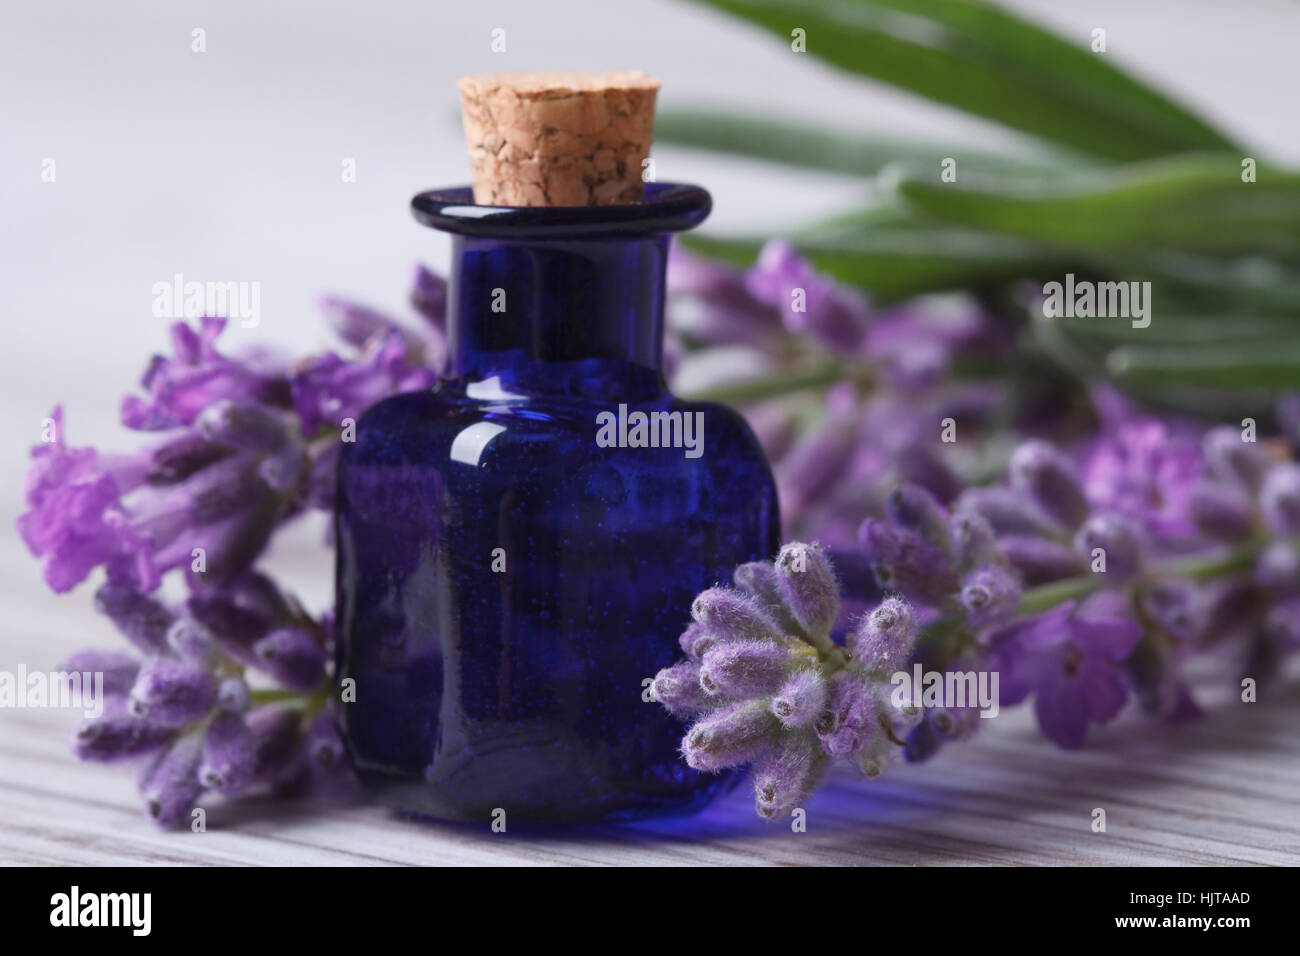 aromatic lavender oil in the blue bottle and flowers on wooden table. Horizontal close-up Stock Photo